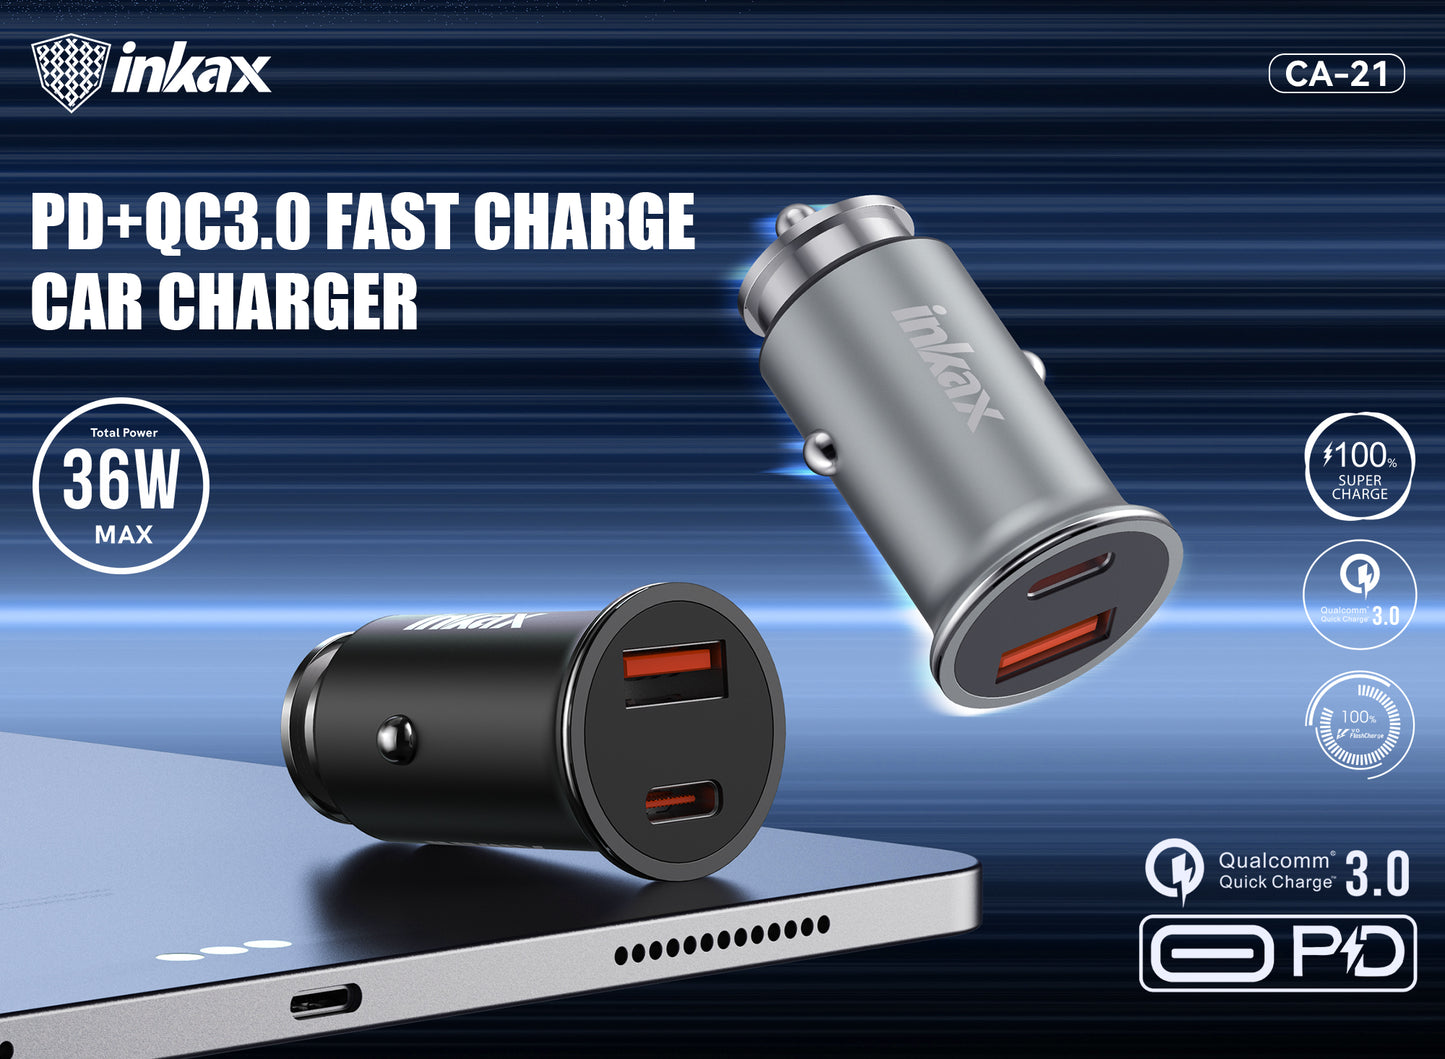 Inkax 36W Fast Car Charger